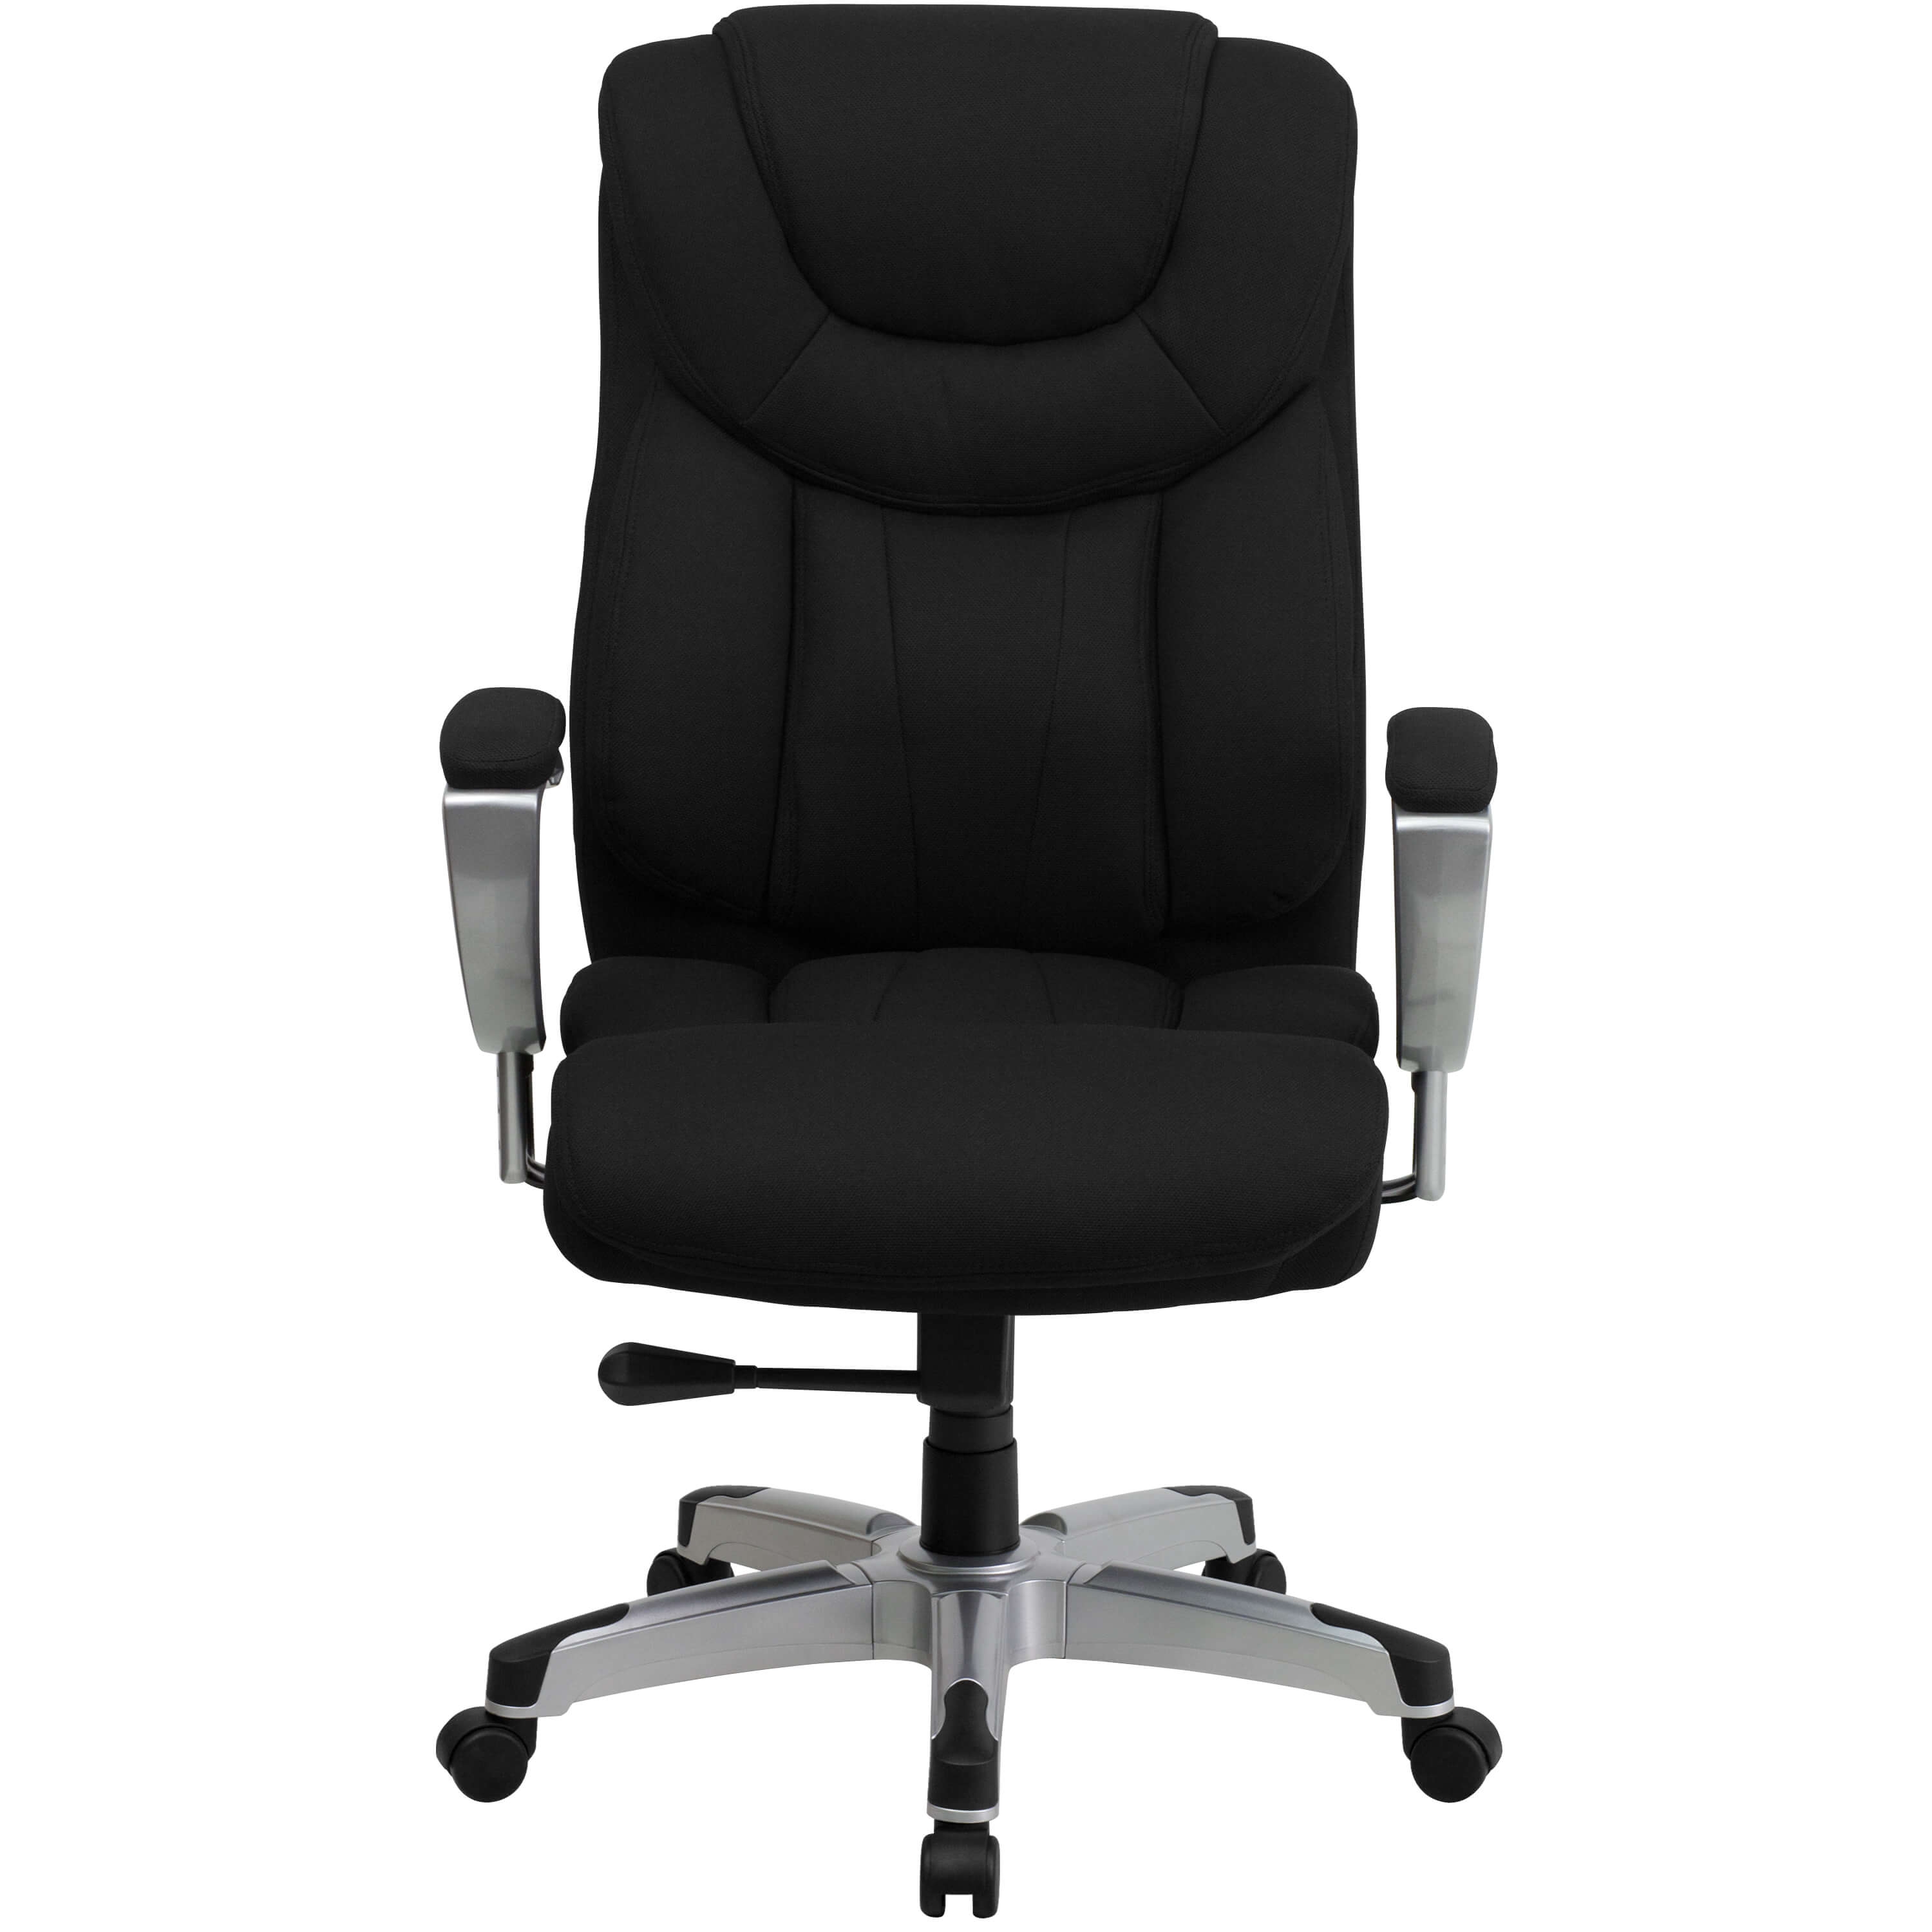 Office chairs with high weight capacity front view